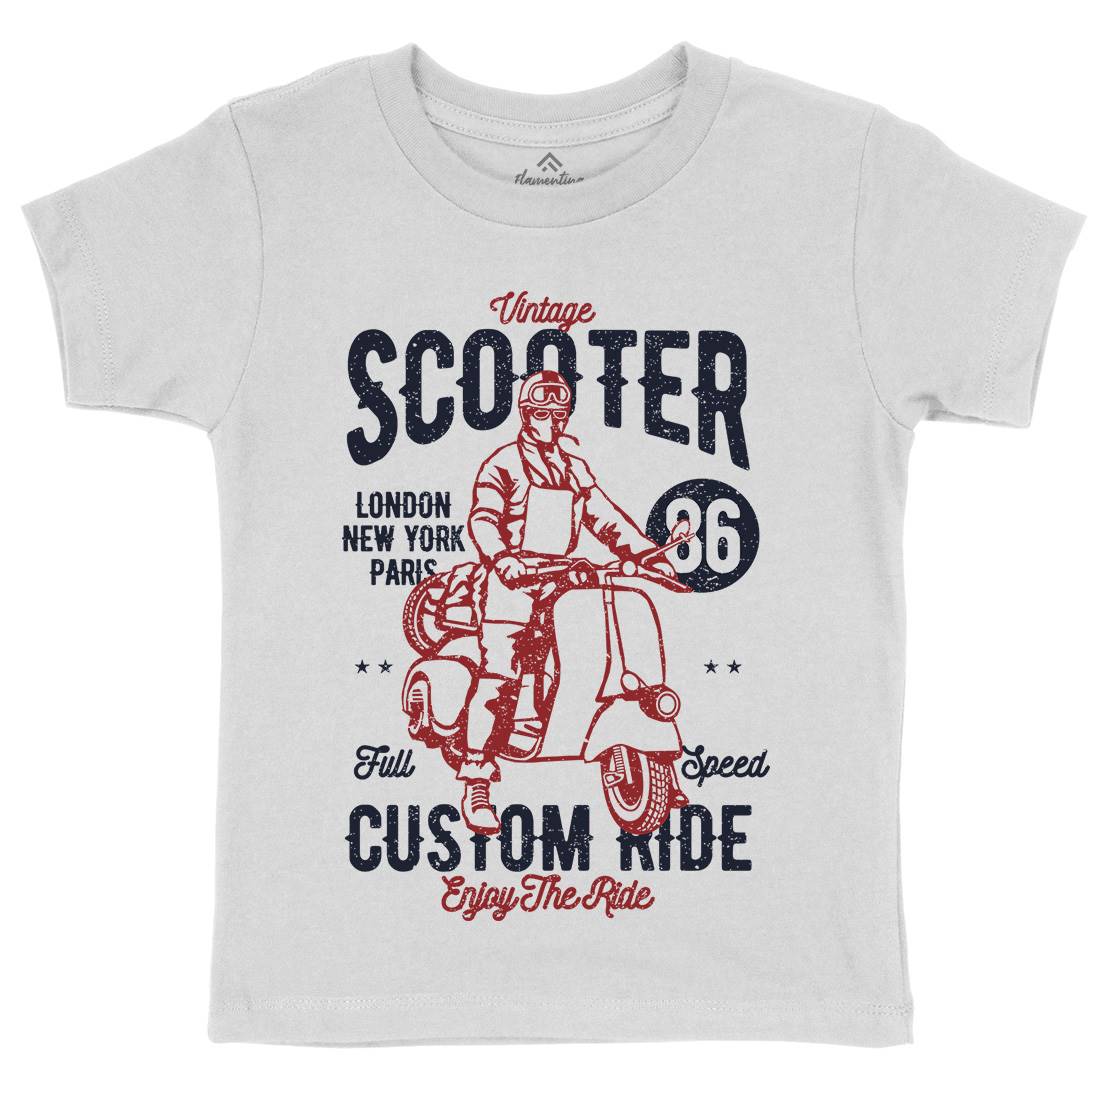 Vintage Scooter Kids Crew Neck T-Shirt Motorcycles A787